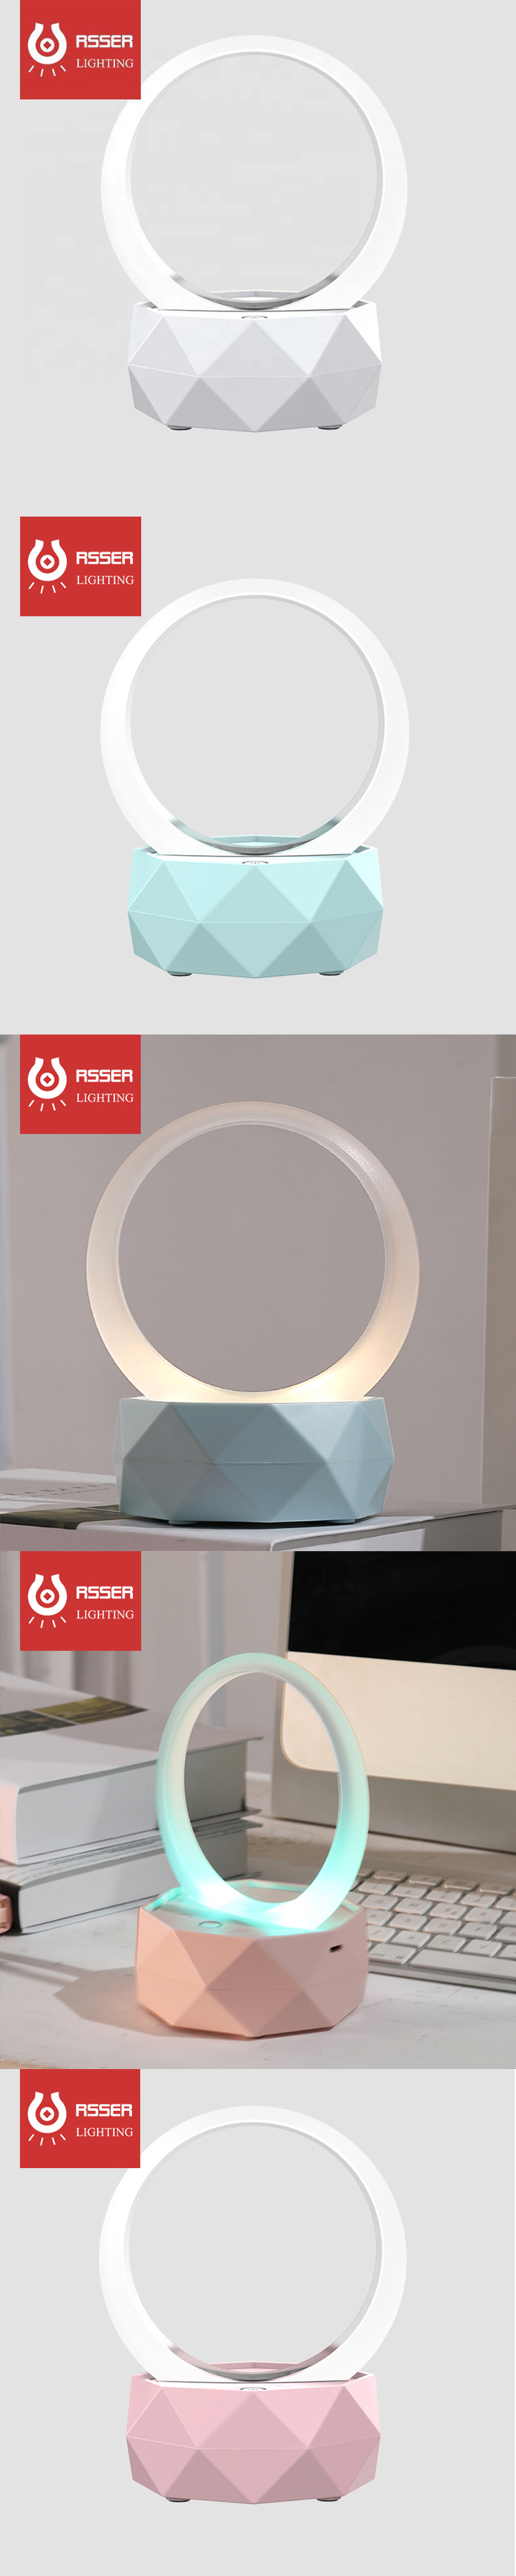 New Speakers Wireless Night Lamp BT Stereo Portable Mini Stereo for Bedside bedroom